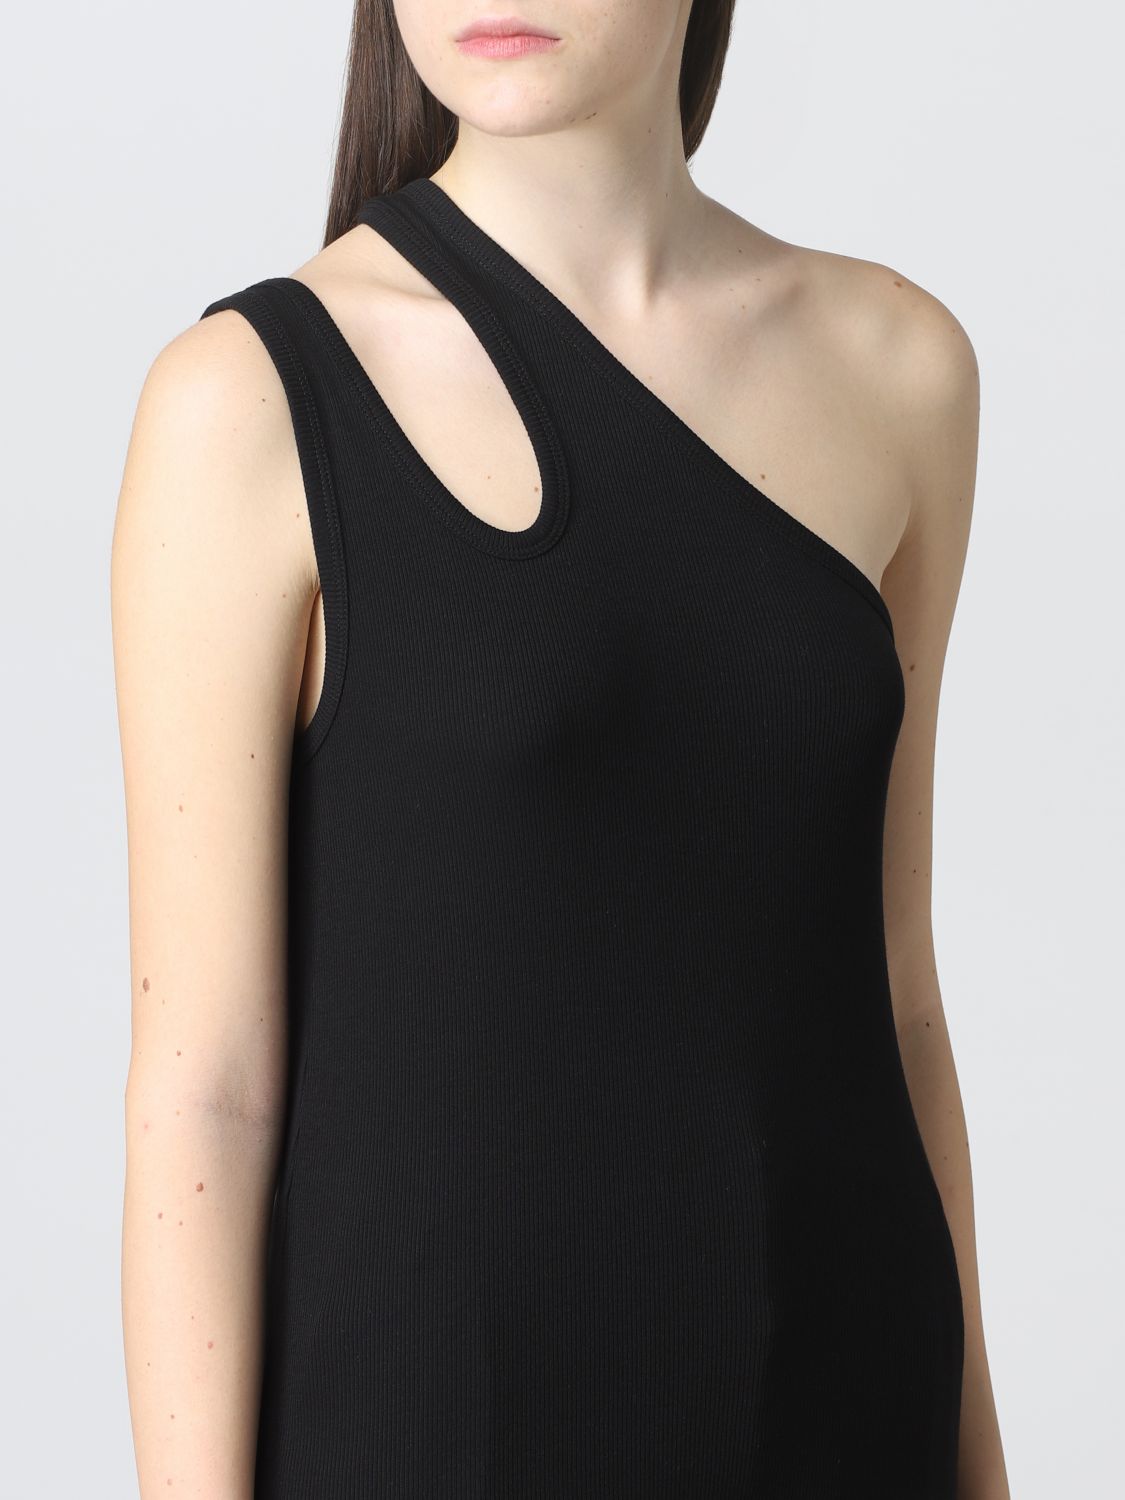 Top Remain: Remain top for women black 3